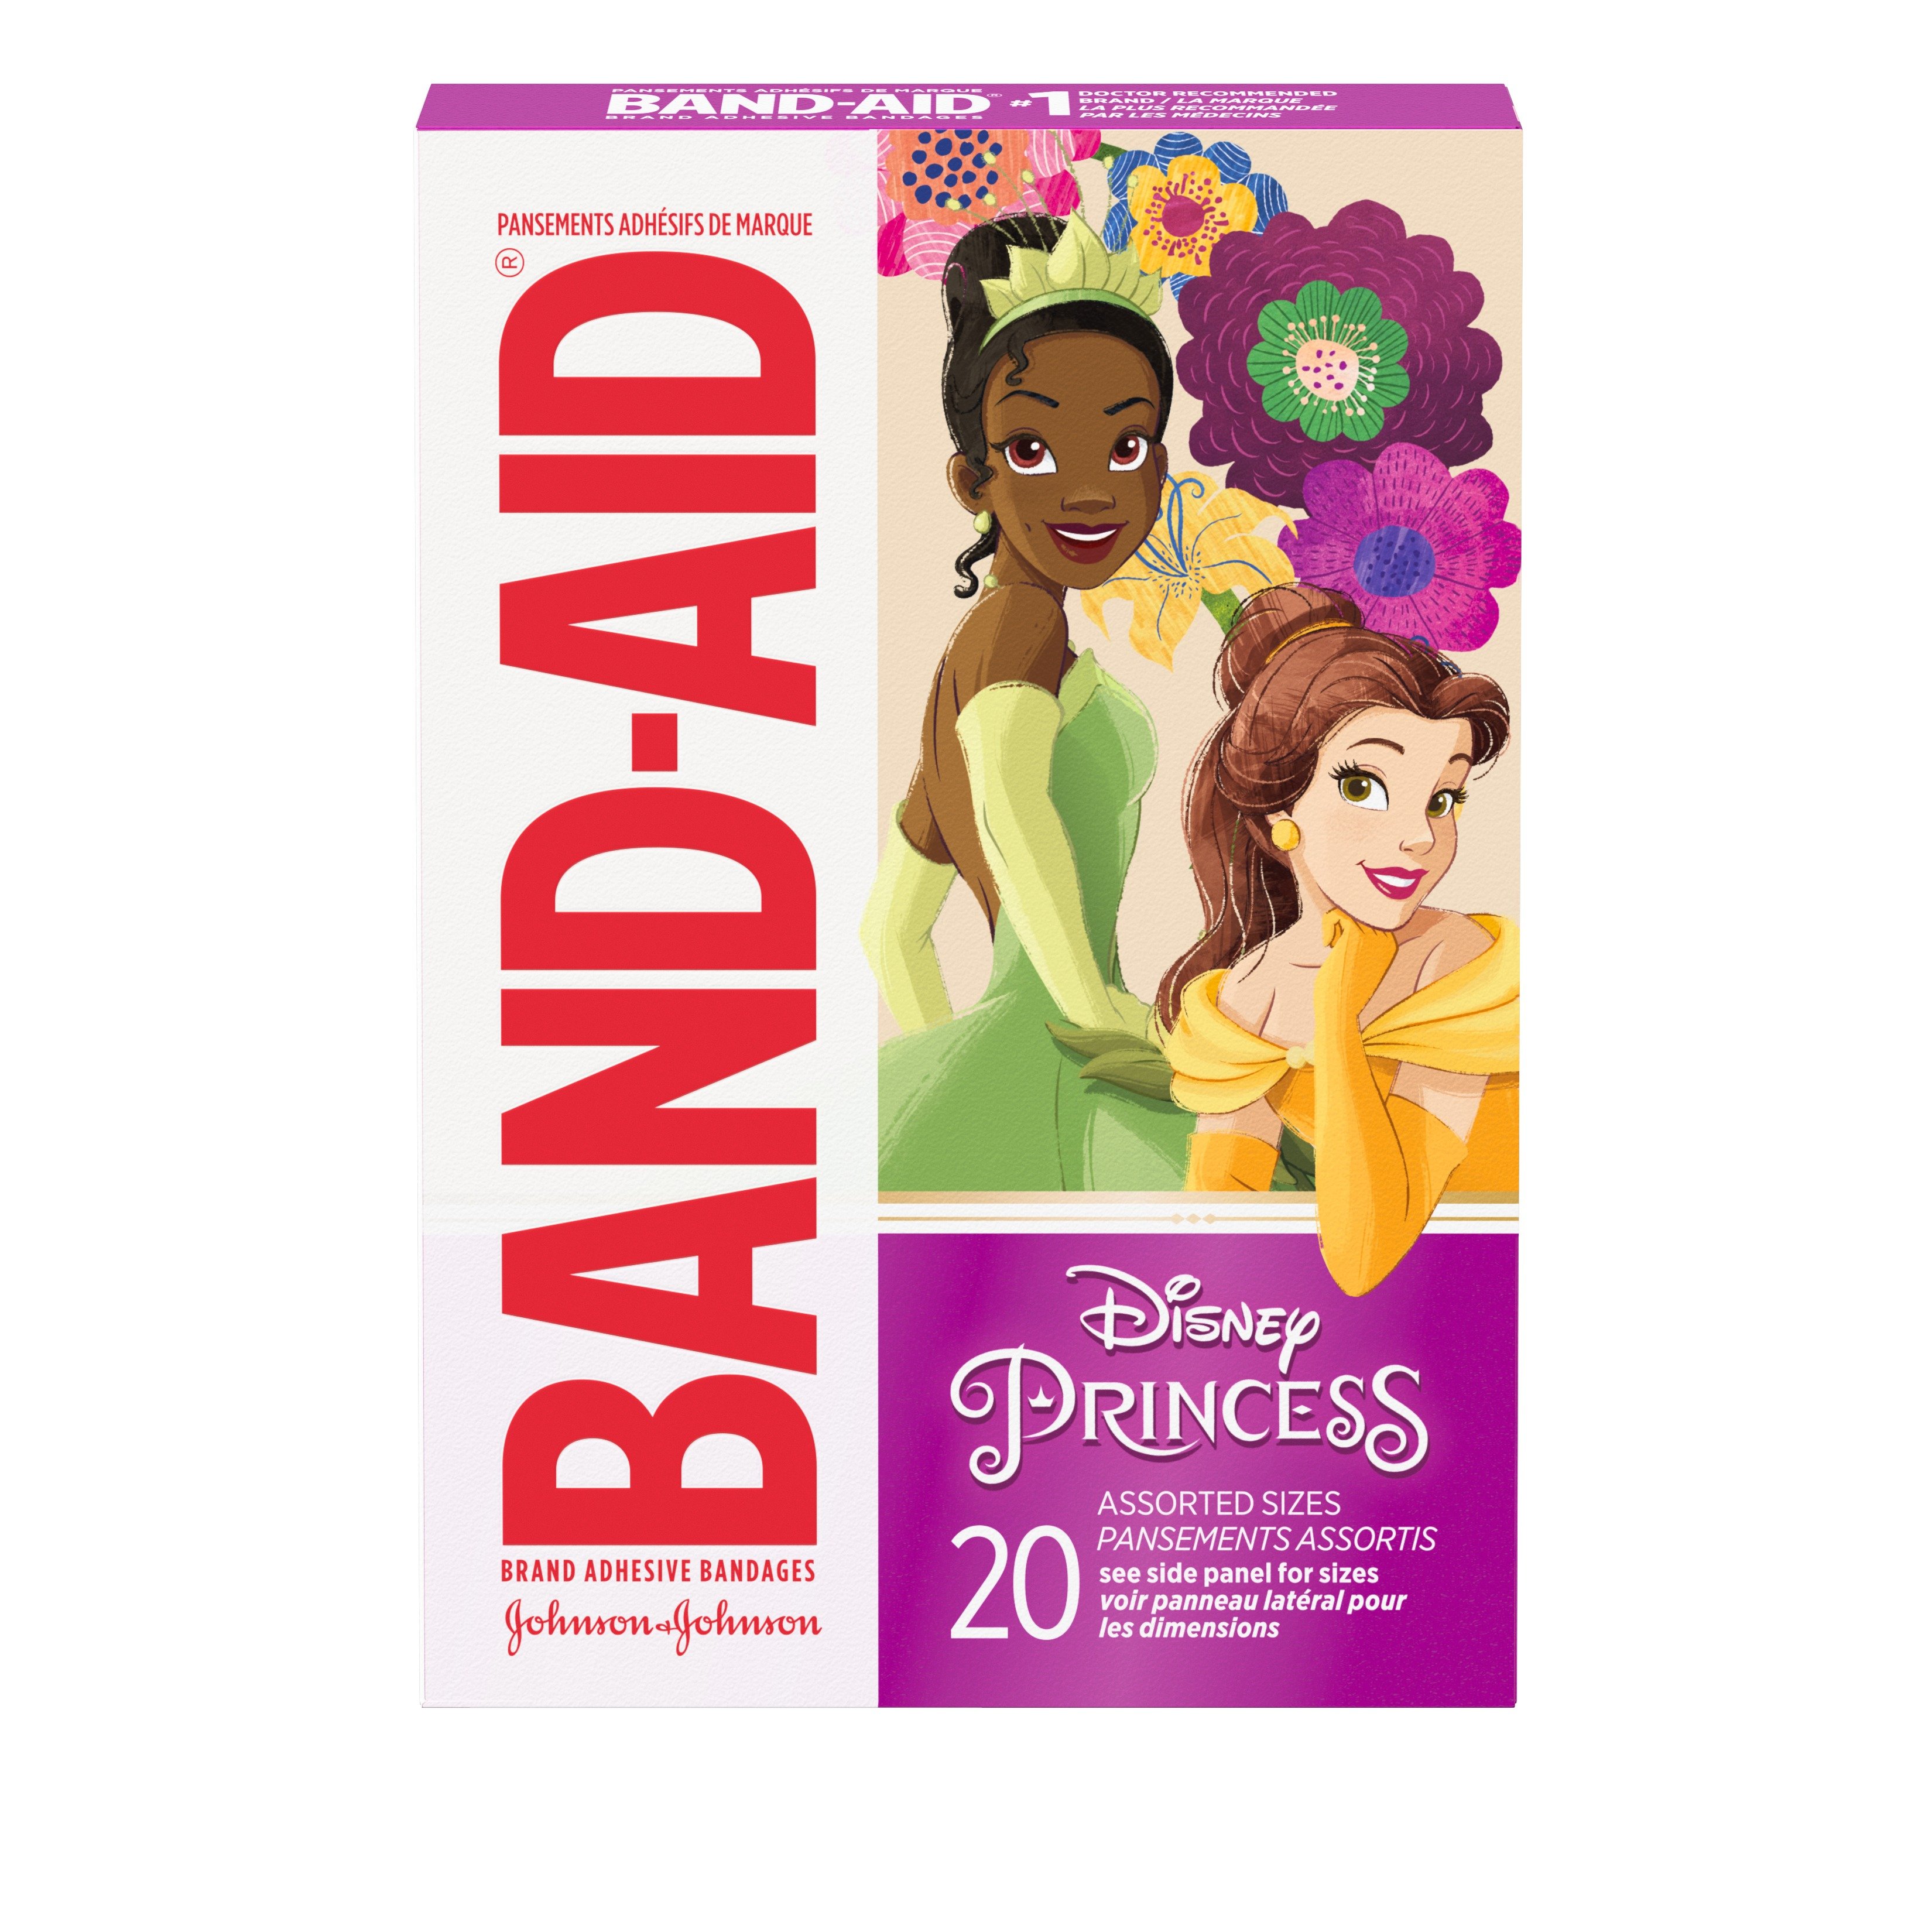 A packet of BAND-AID® DISNEY Princess Bandages, Assorted Sizes, 20 count